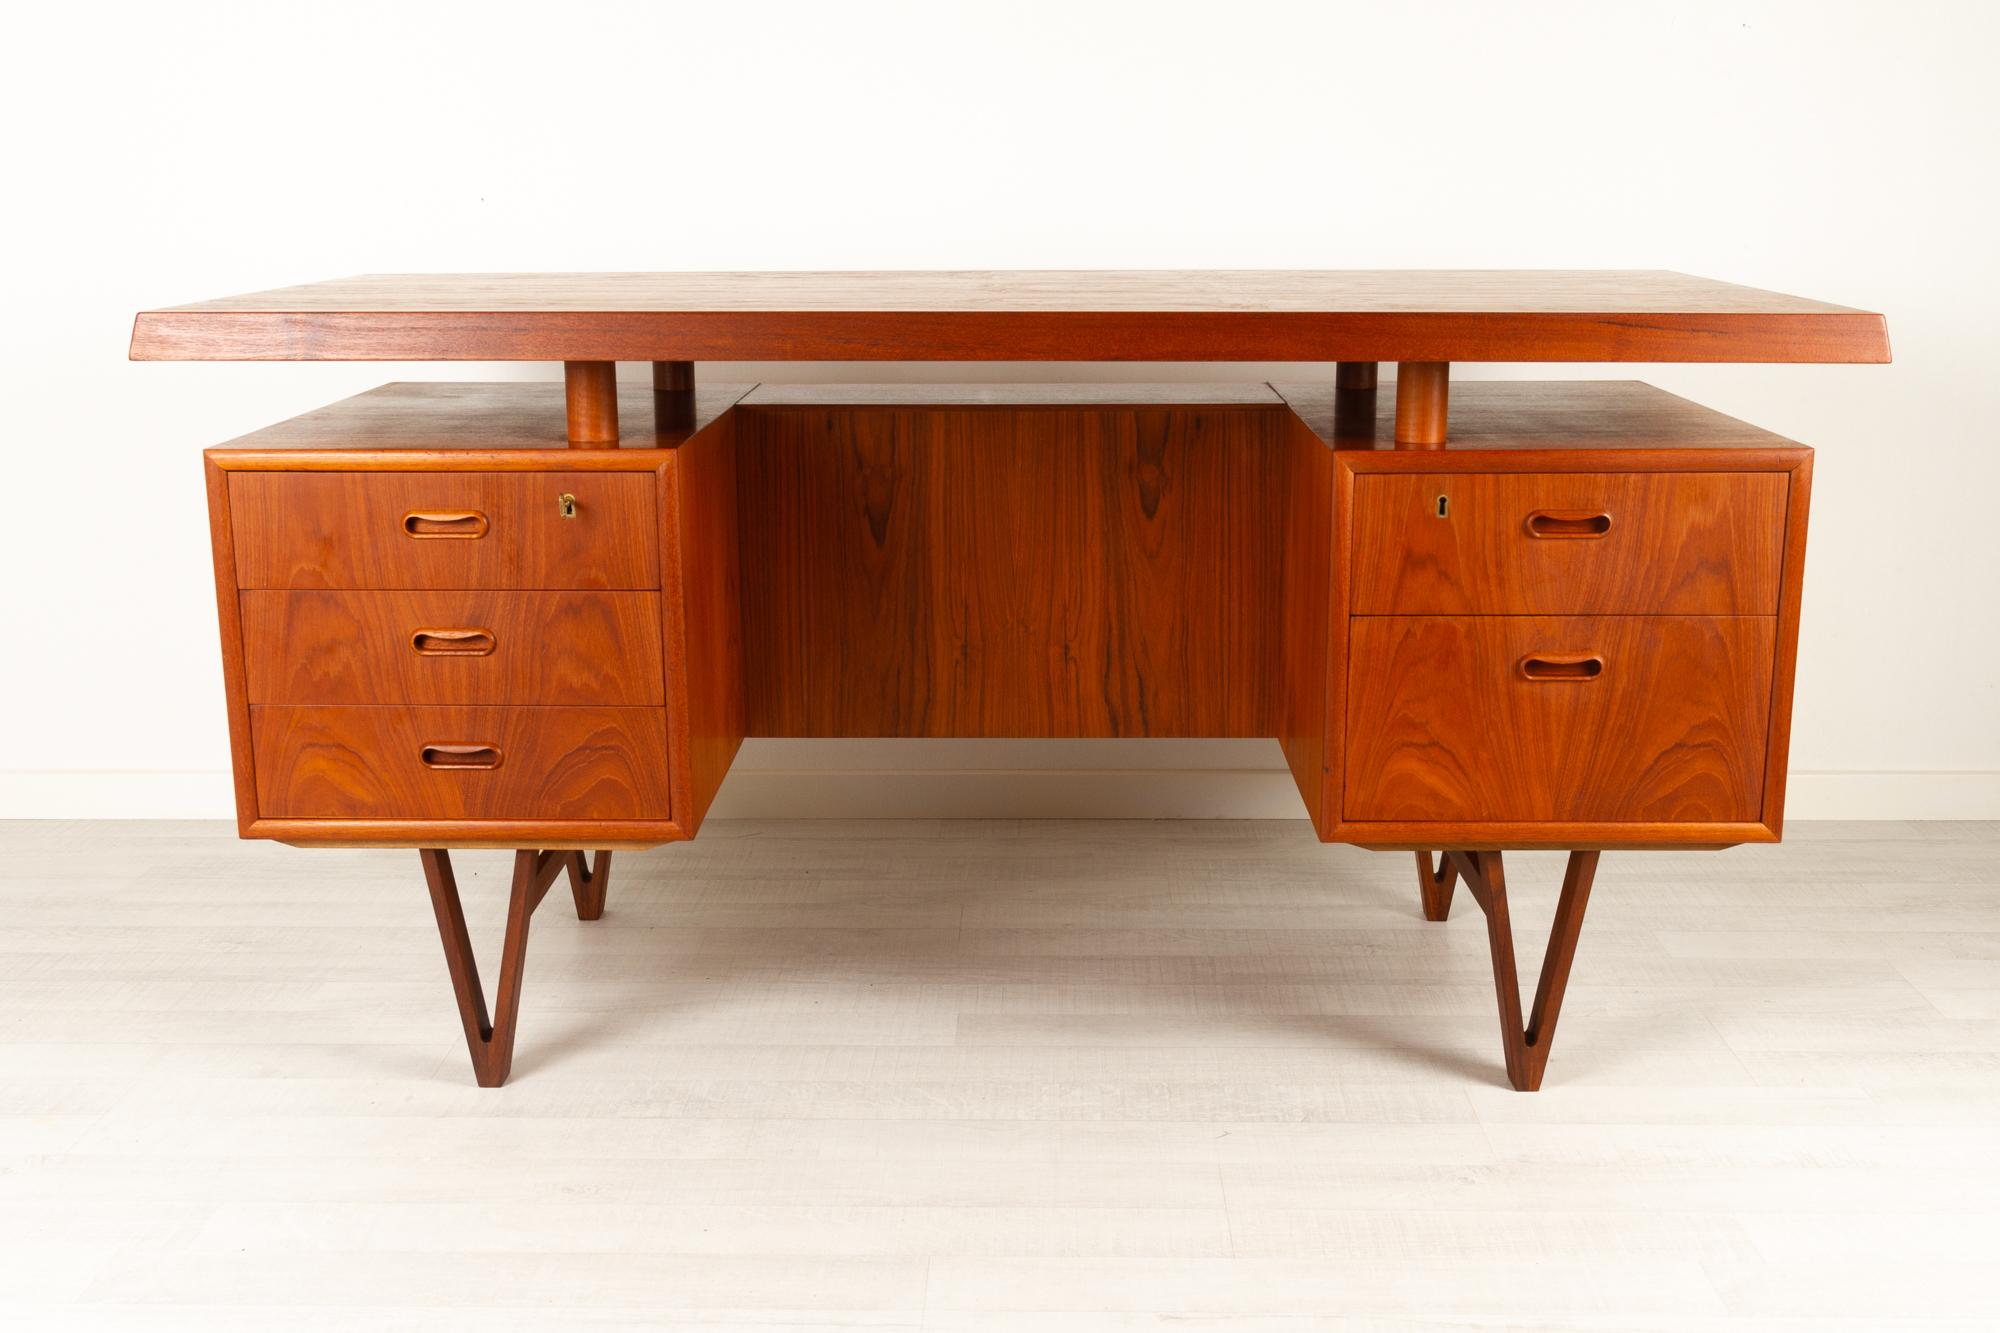 Danish modern teak desk, 1960s
Large Danish Mid-Century Modern executive writing desk in teak. Floating table top resting on four pillars of solid teak. Five drawers, two with lock, key included. Cabinet with drop down door. Standing on V-shaped